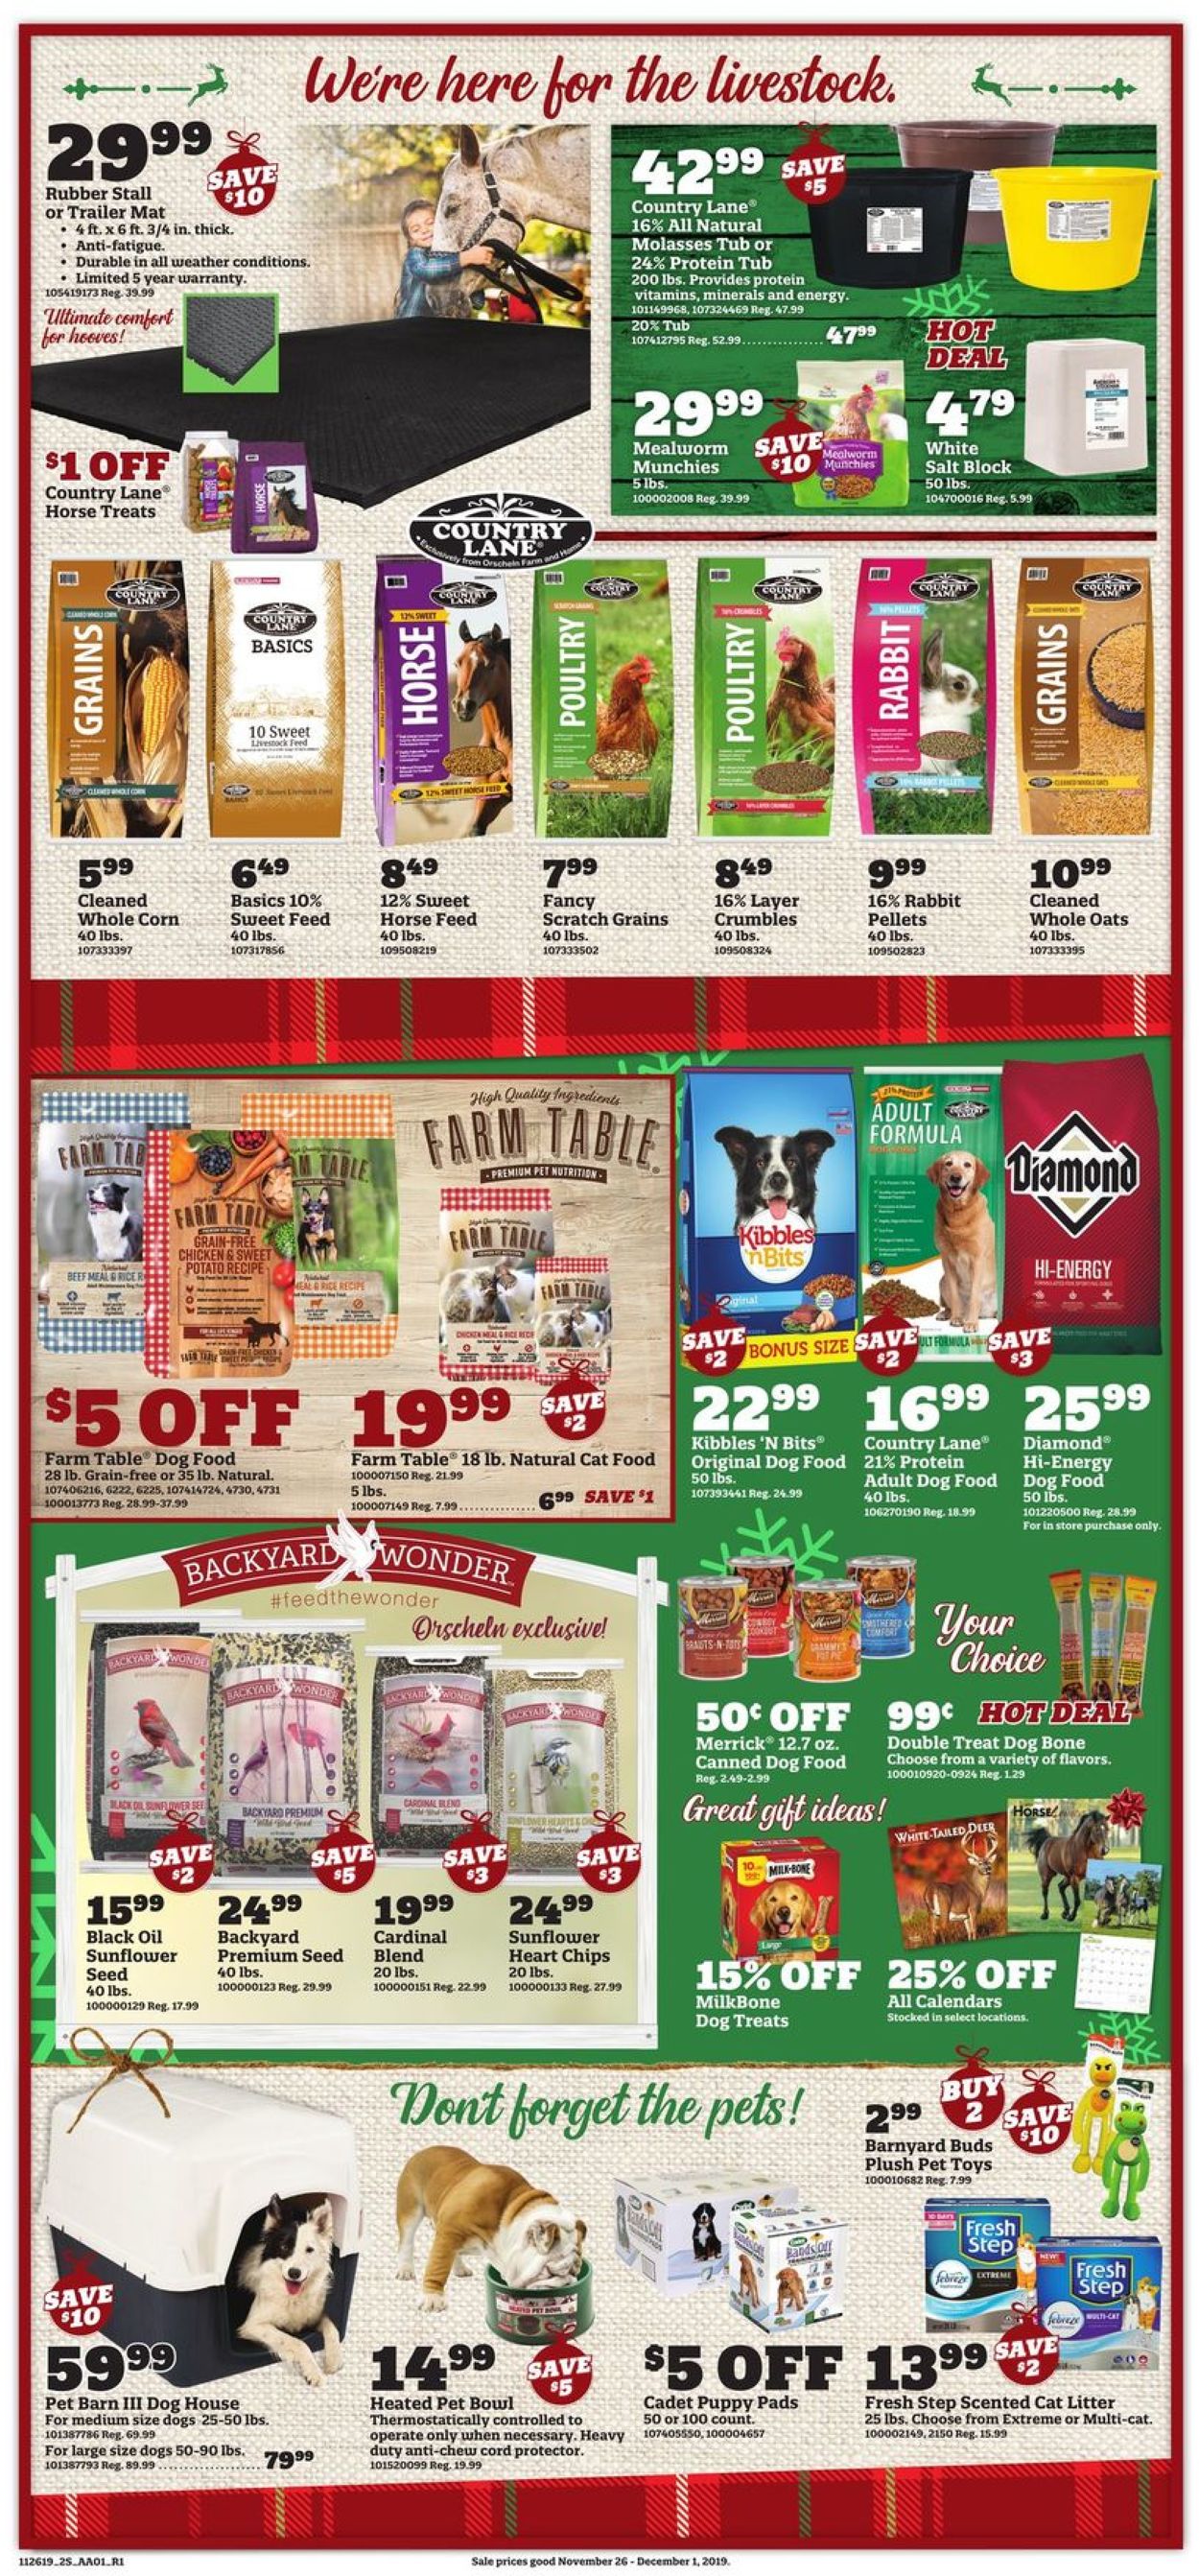 Orscheln Farm and Home - Black Friday Ad 2019 Current weekly ad 11/26 - 12/01/2019 [2 ...